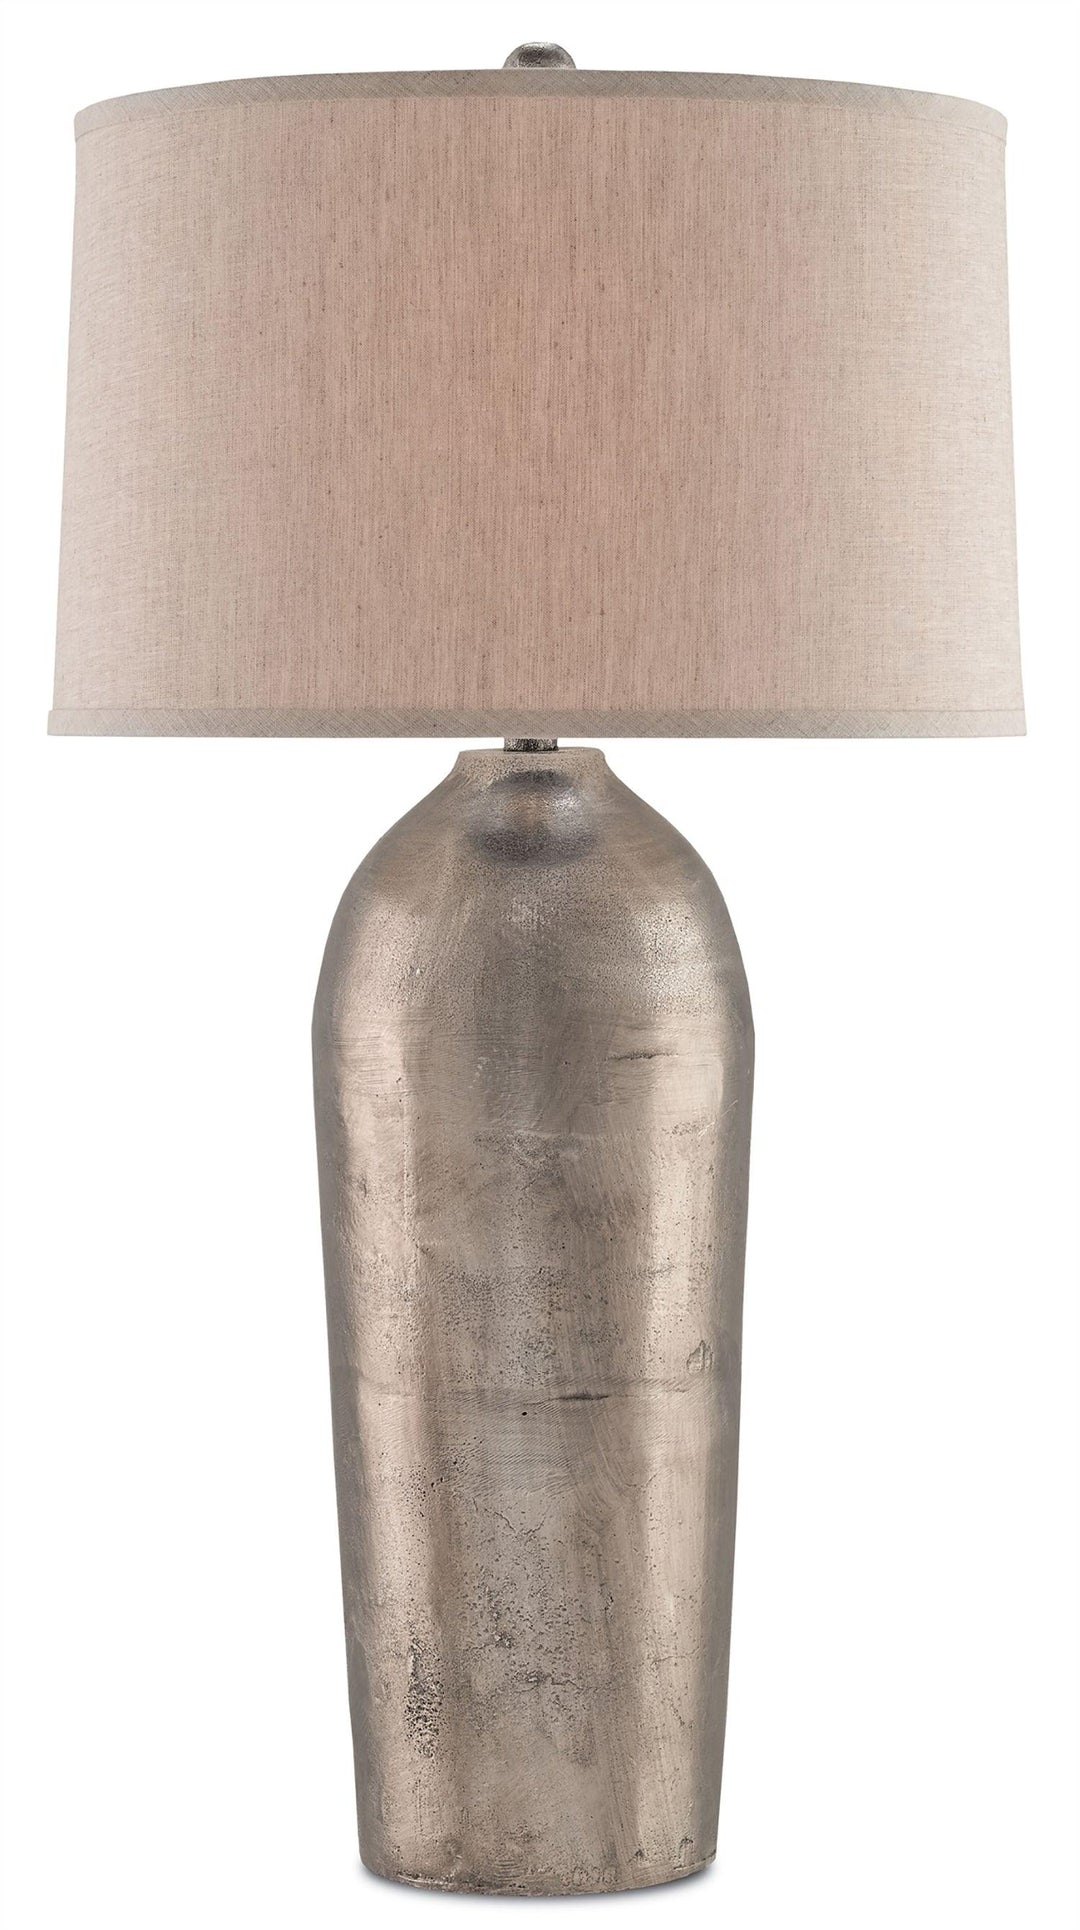 Reliance Table Lamp - Casey & Company